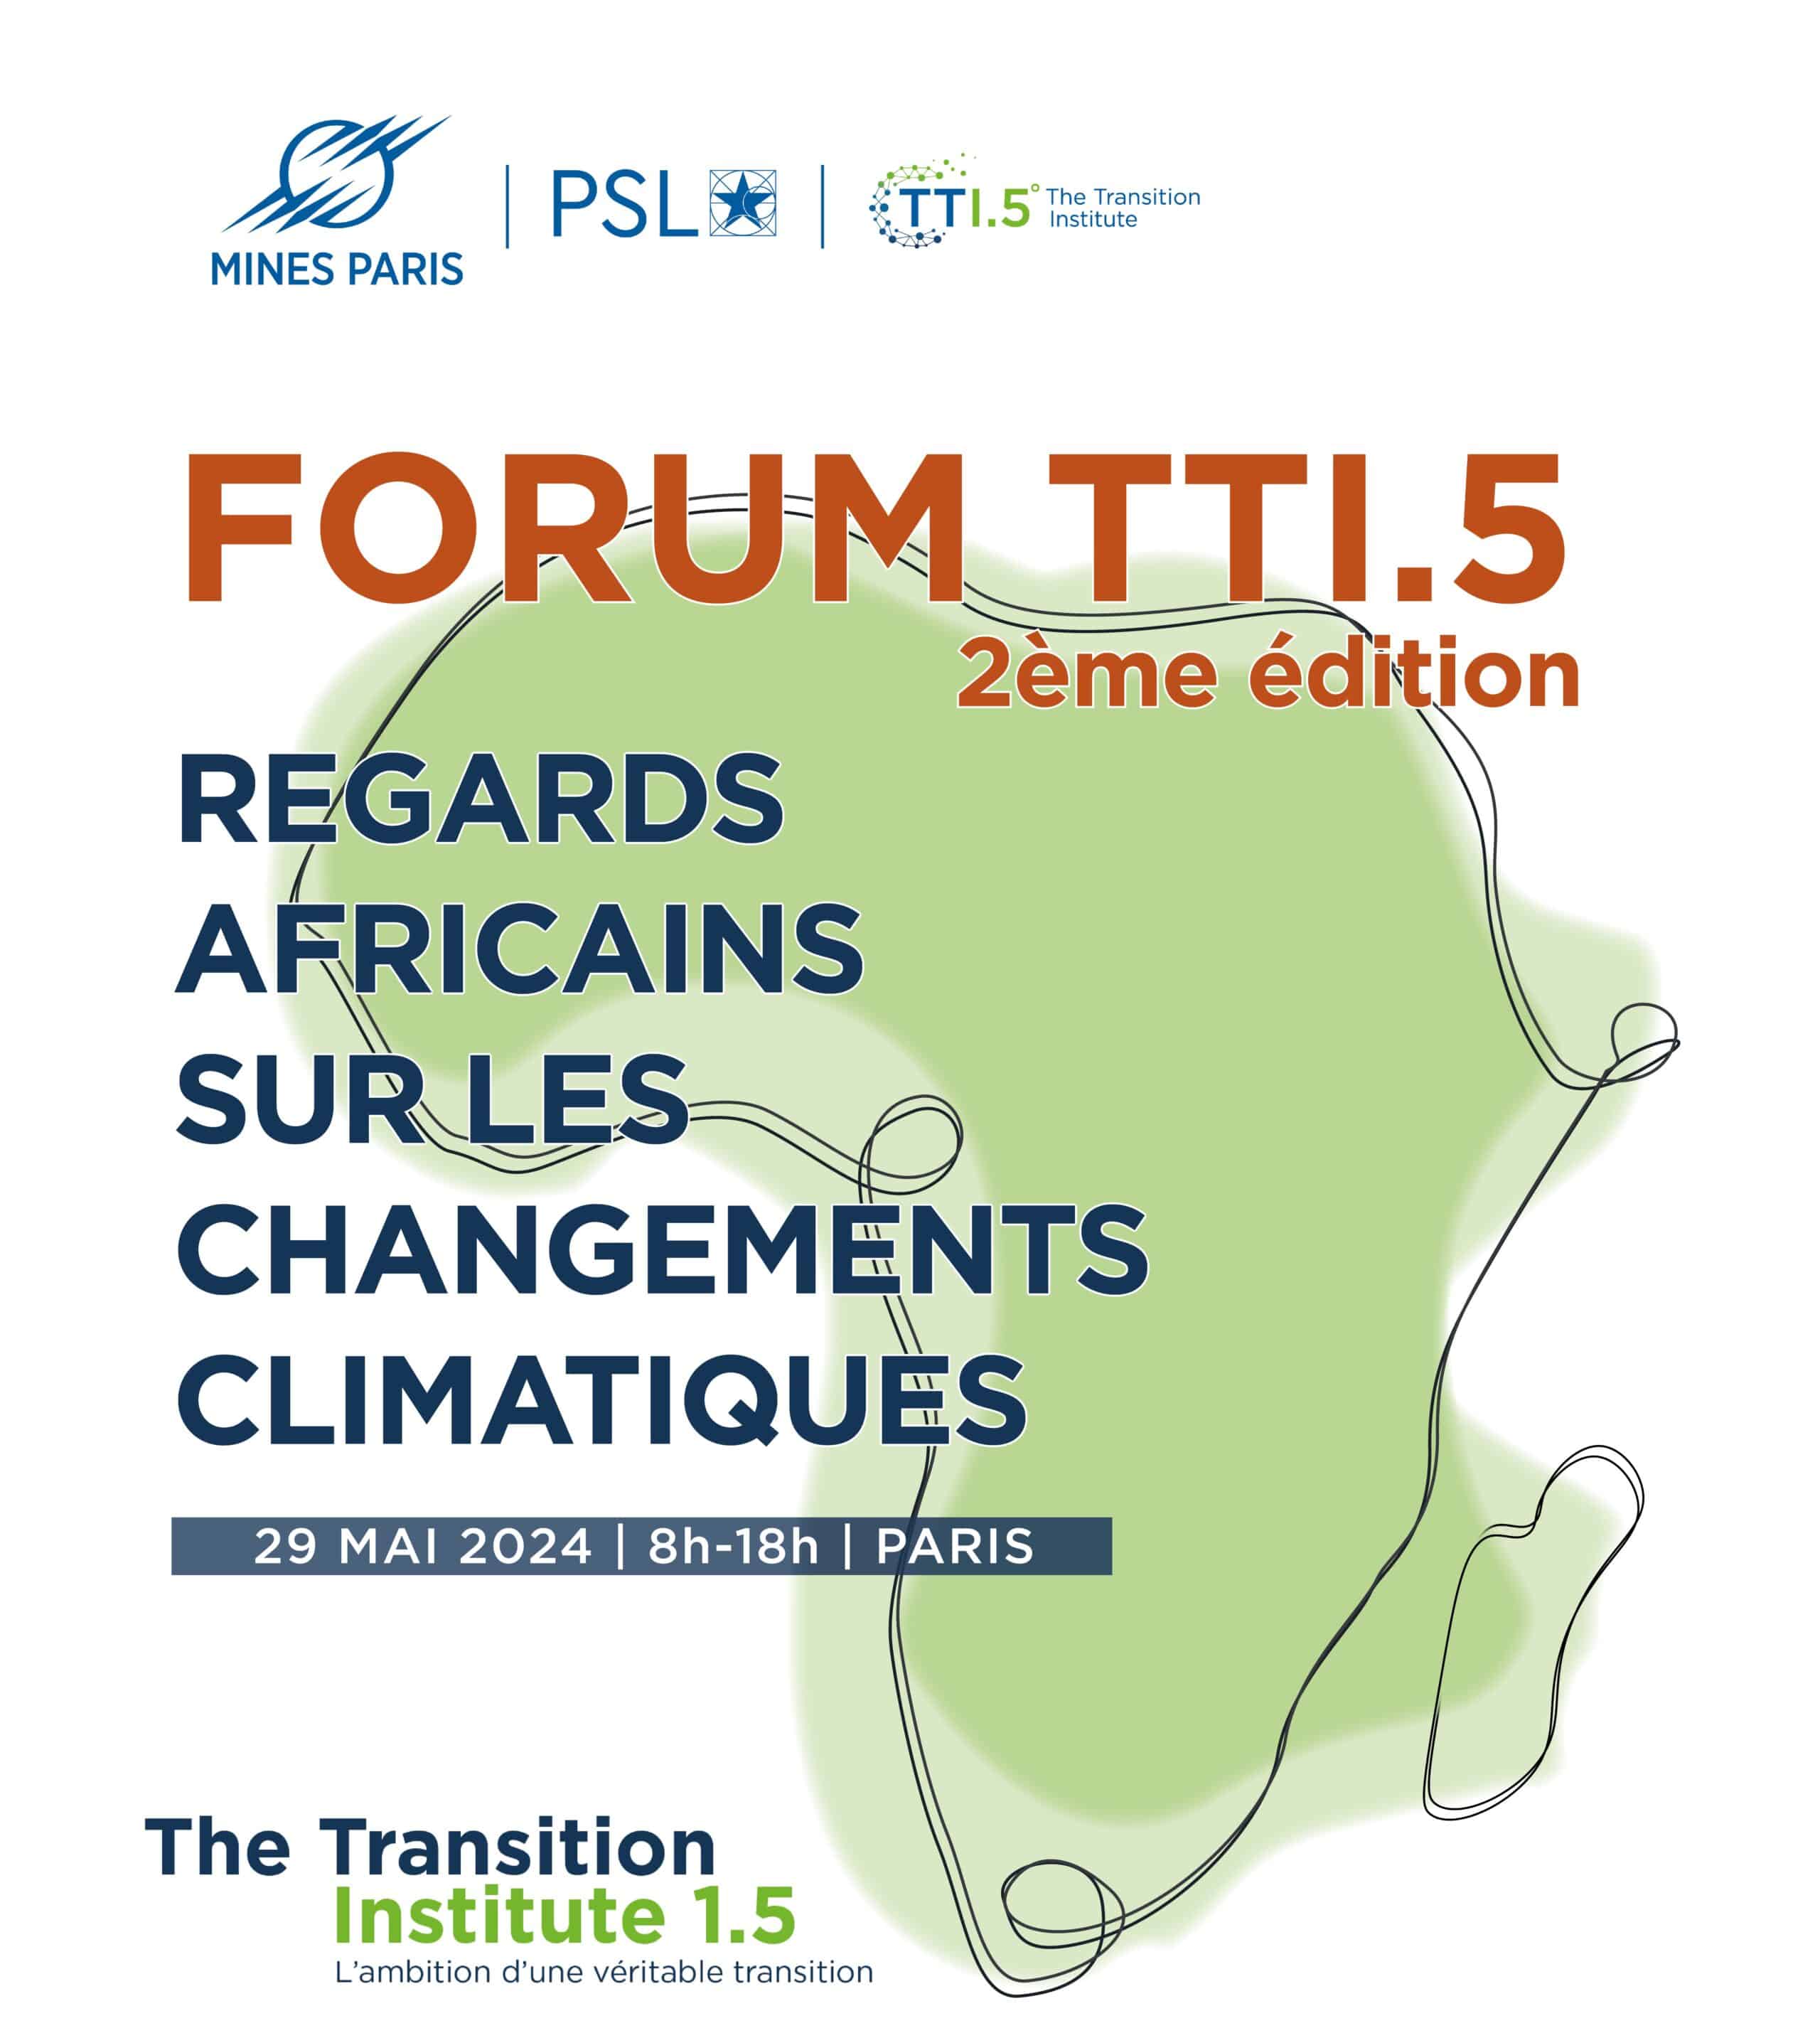 Mines Paris – PSL and The Transition Institute 1.5 invite you to the annual “African Perspectives on Climate Change” forum on May 29.